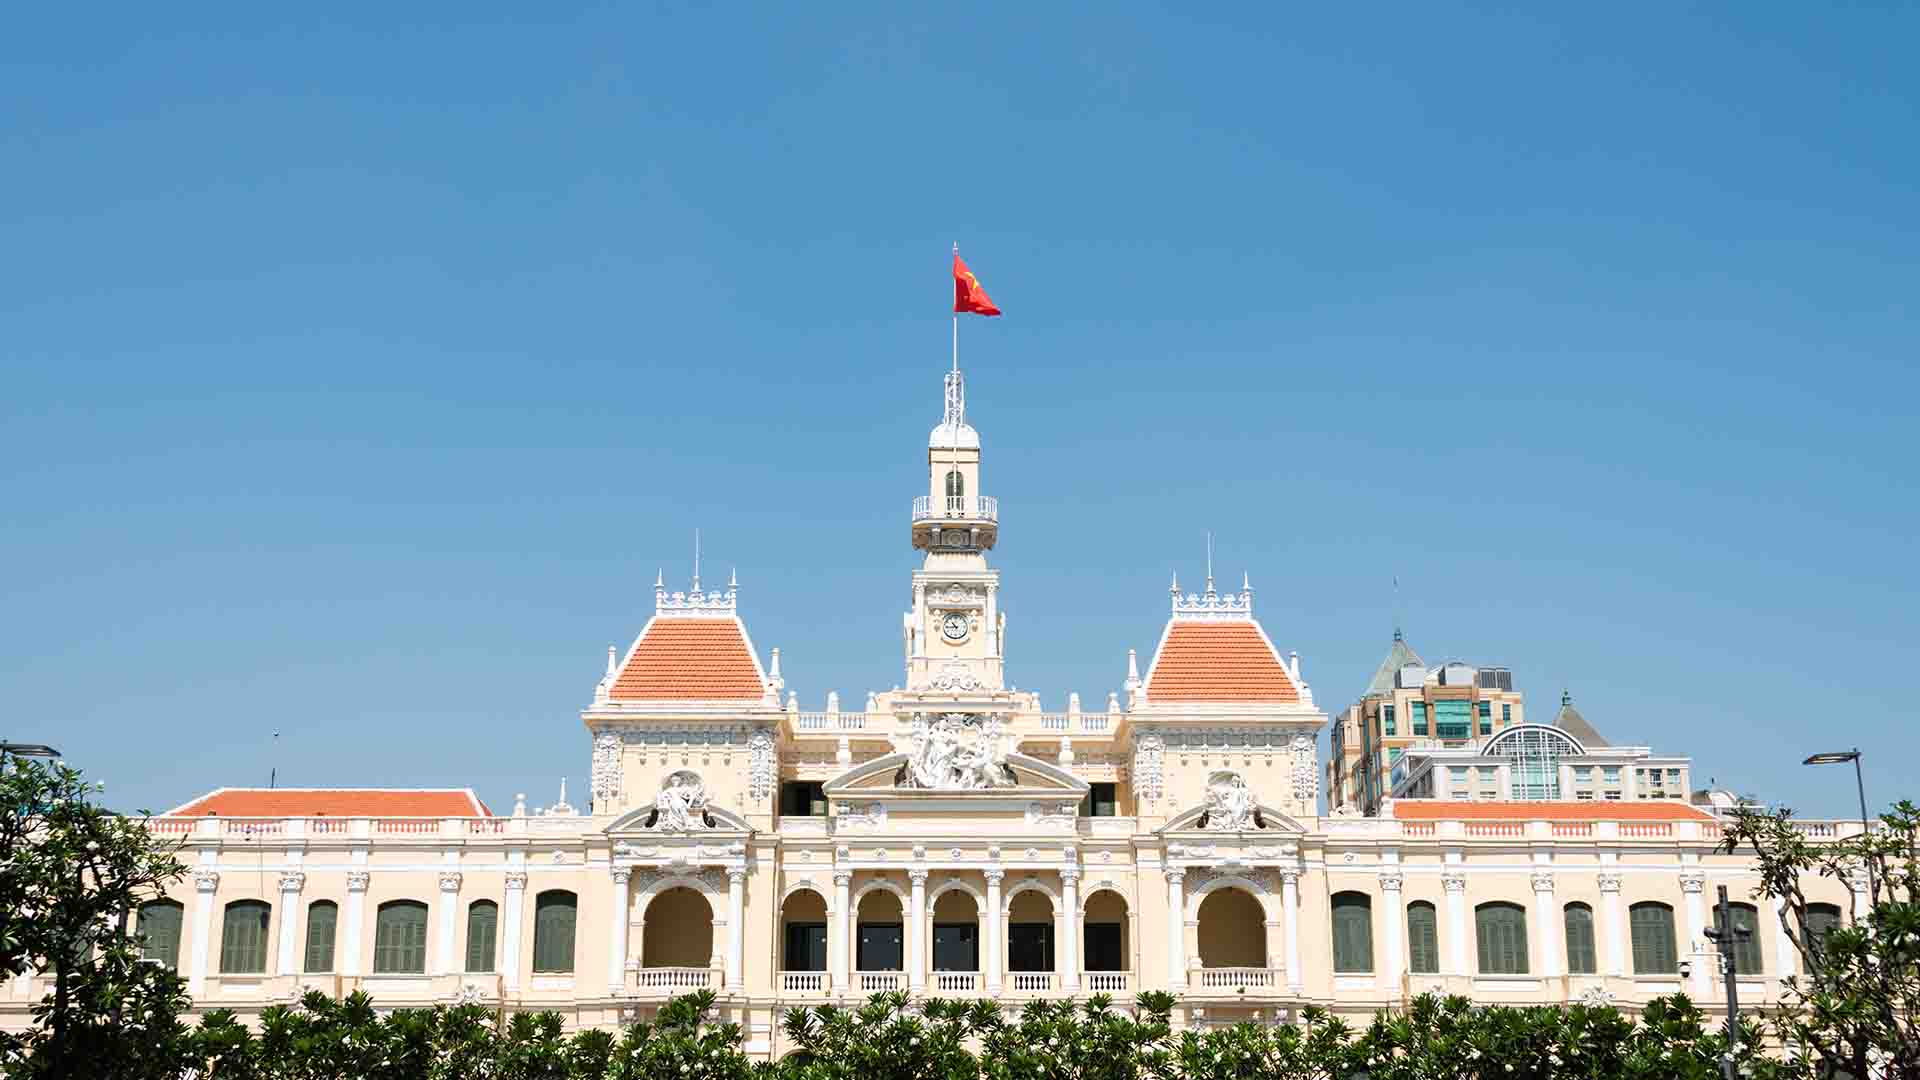 HO CHI MINH CITY HALF DAY SMALL GROUP TOUR 